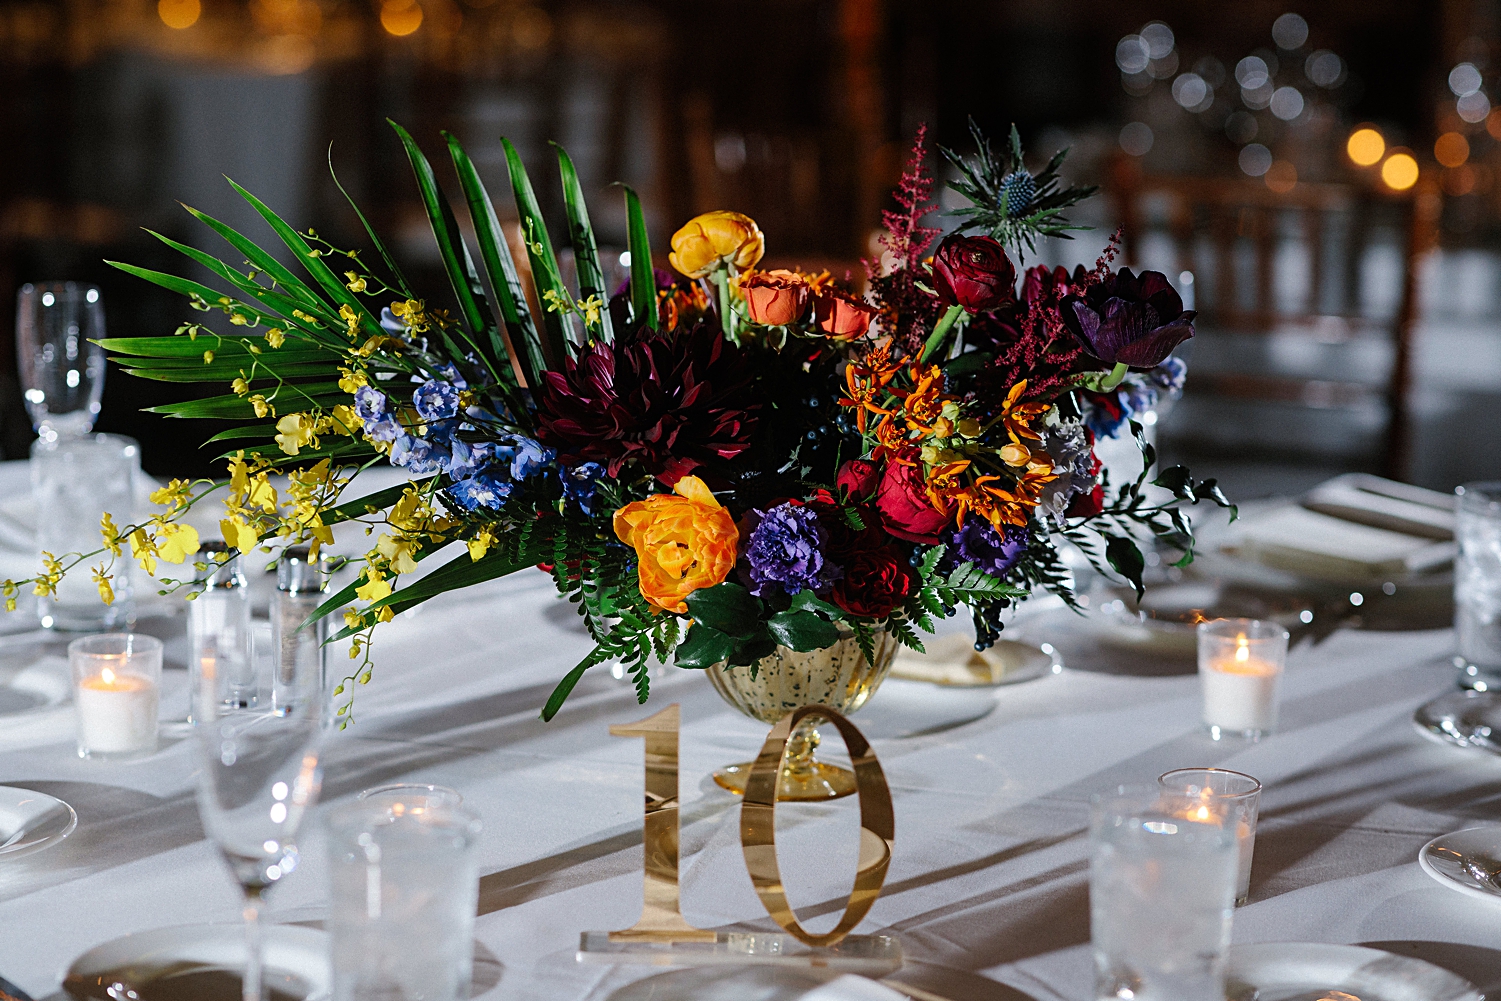 Wedding reception table top with colorful floral centerpiece